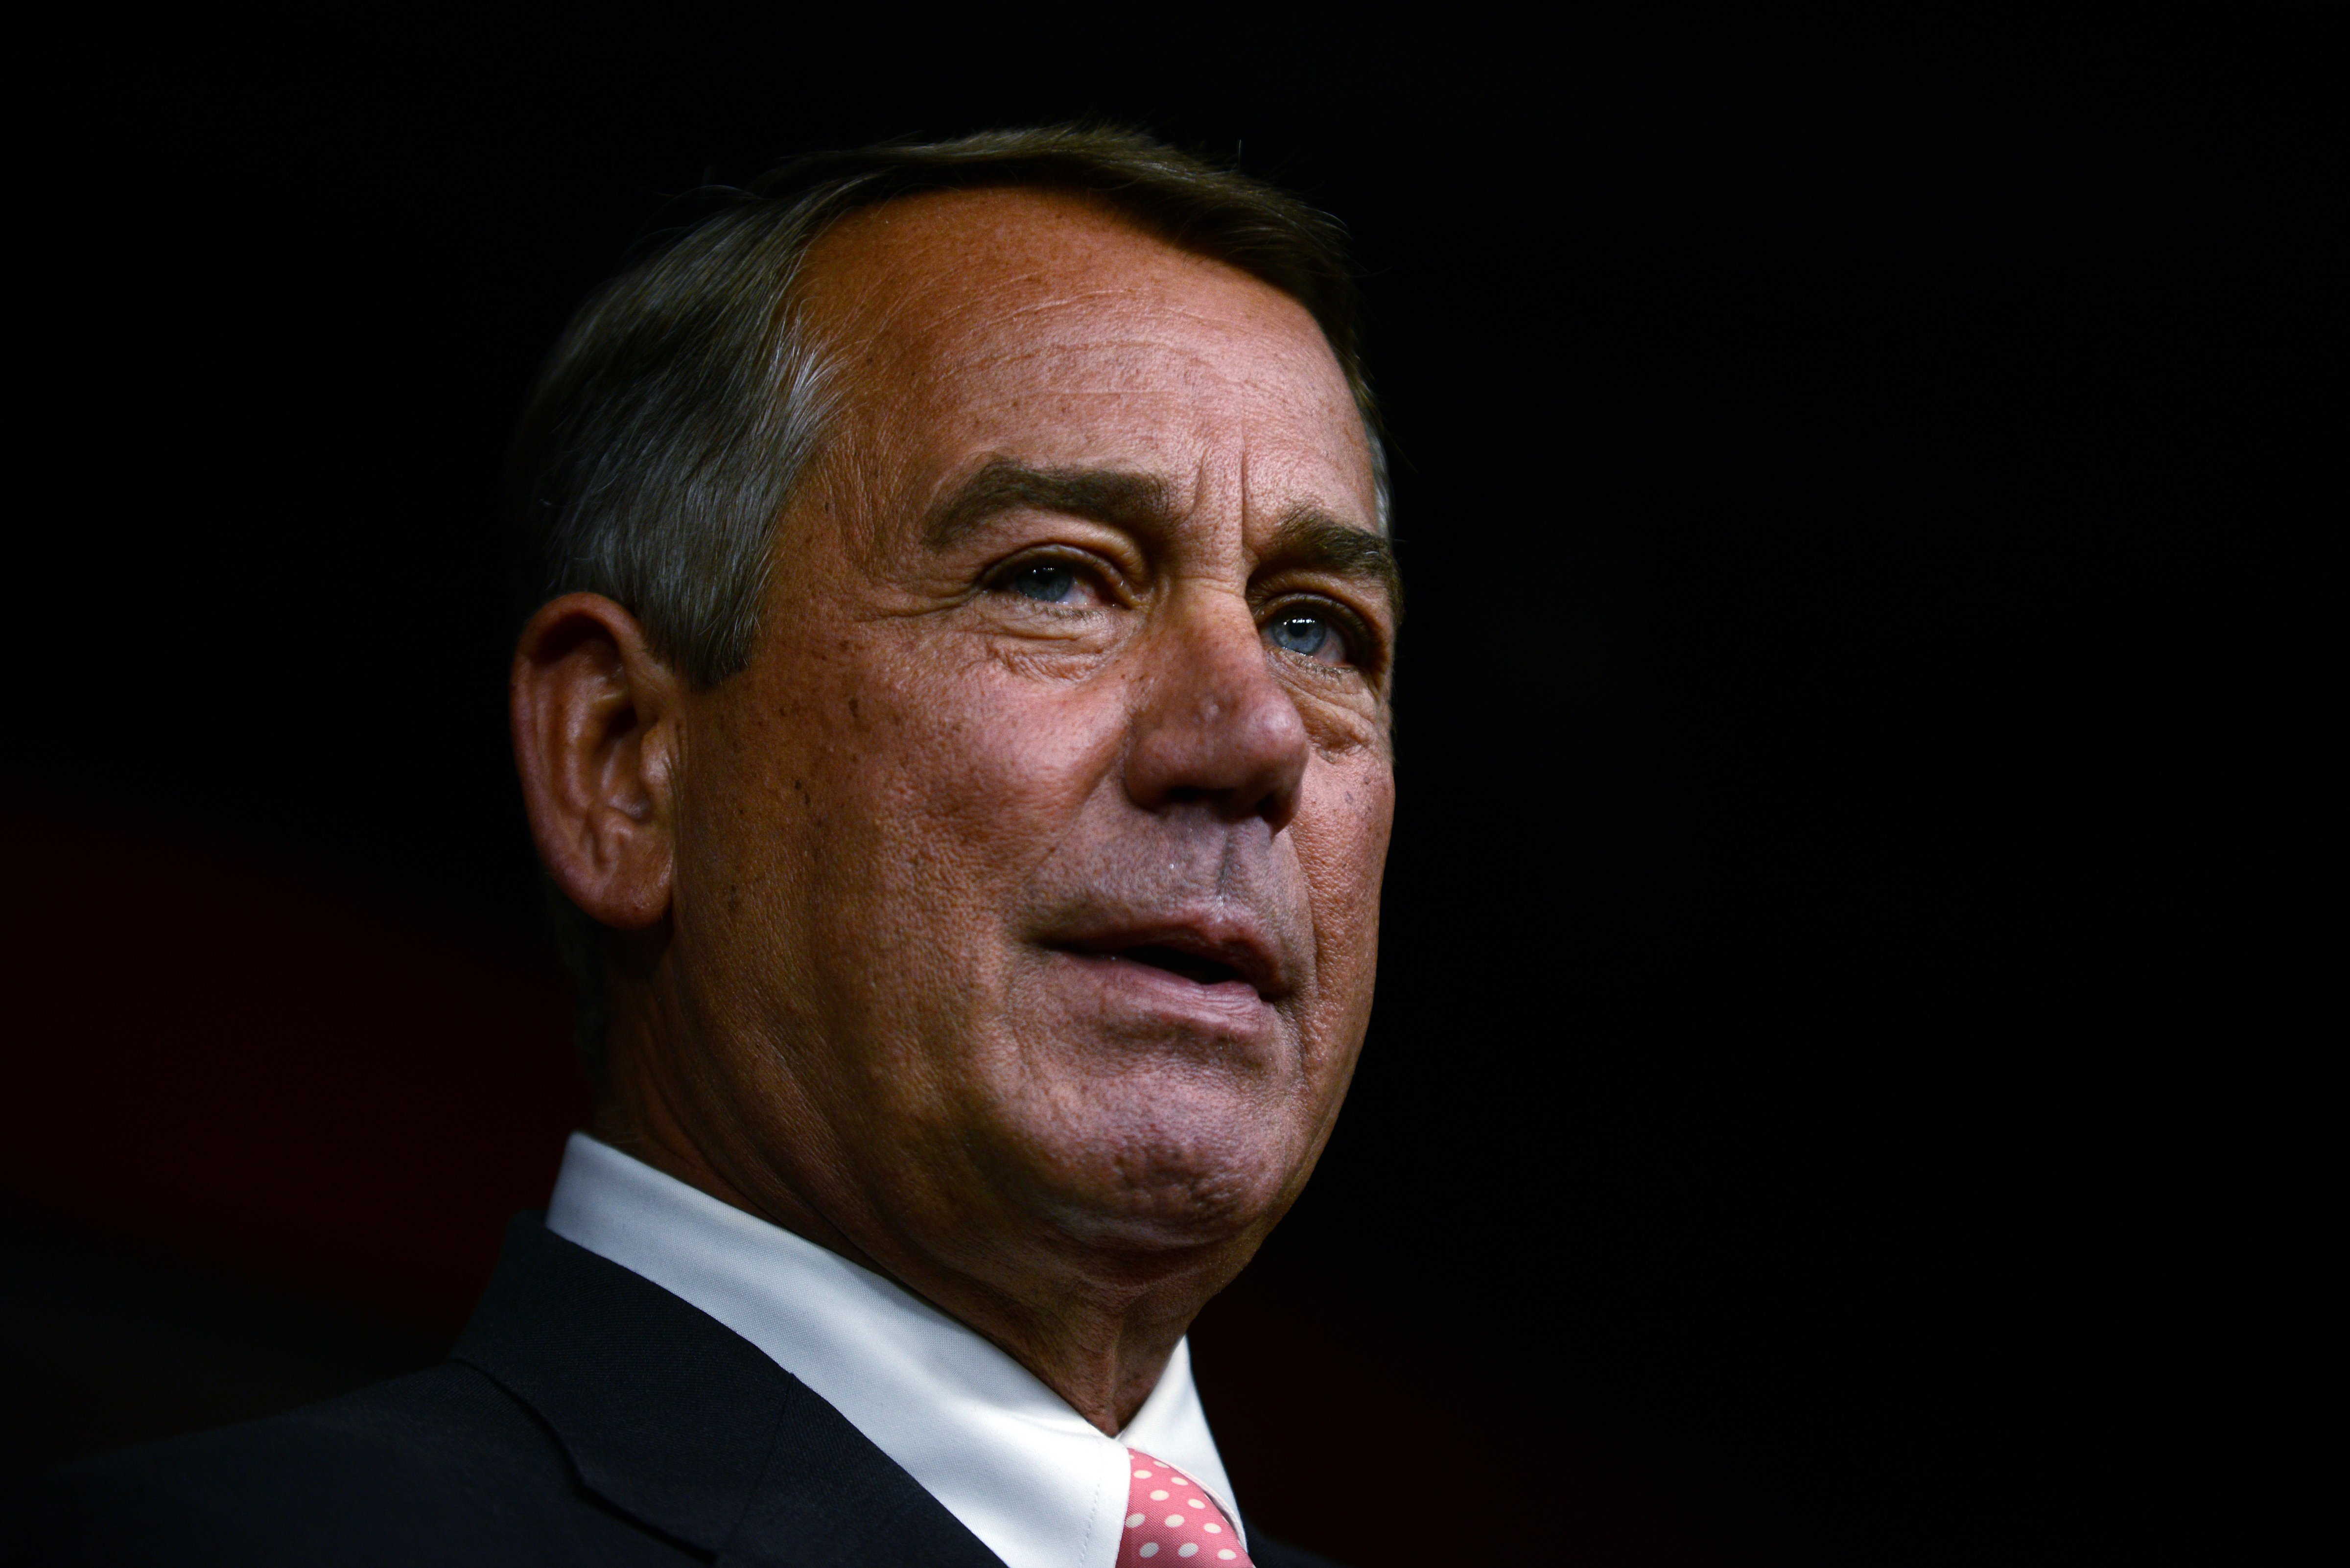 House Speaker John Boehner leaves after announcing his resignation on Capitol Hill in Washington, D.C., September 25, 2015. (Astrid Riecken&mdash;Getty Images)